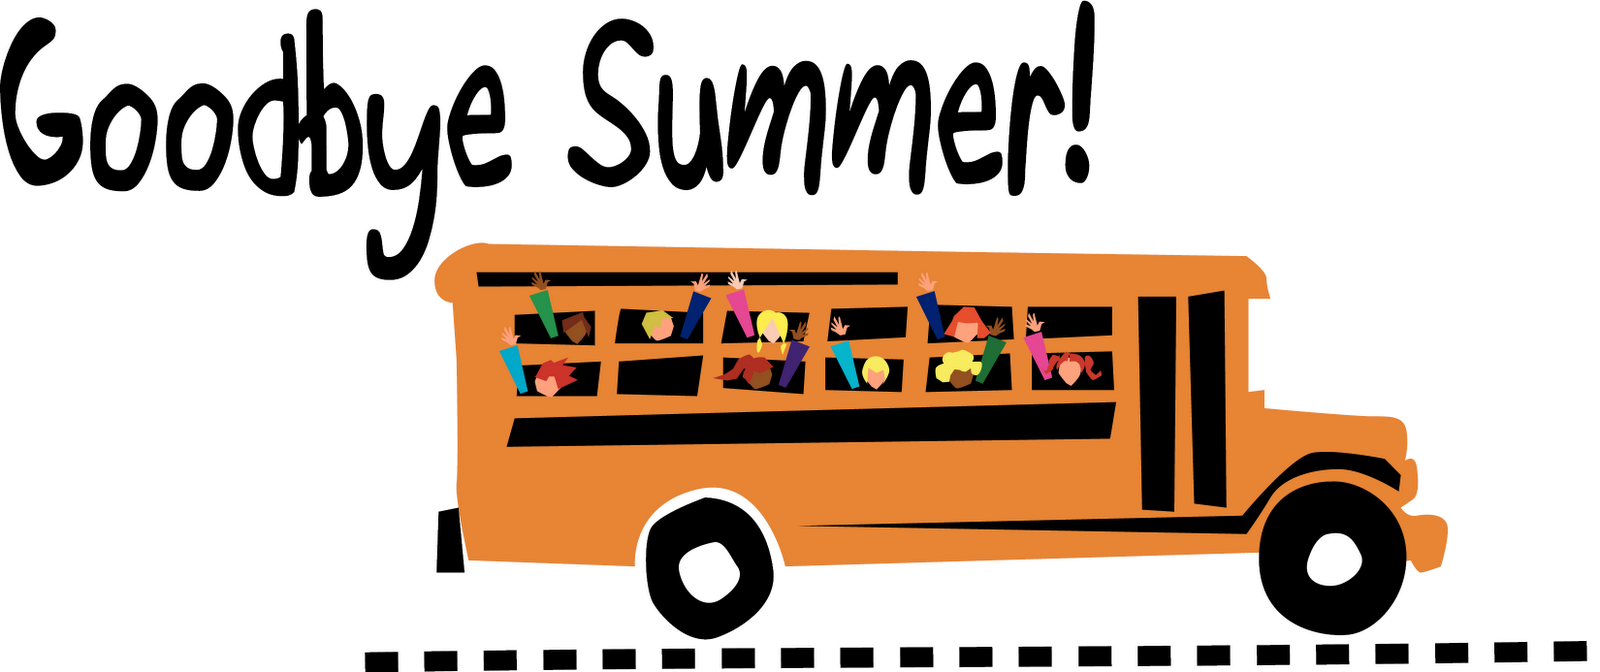 free end of school clipart - photo #48